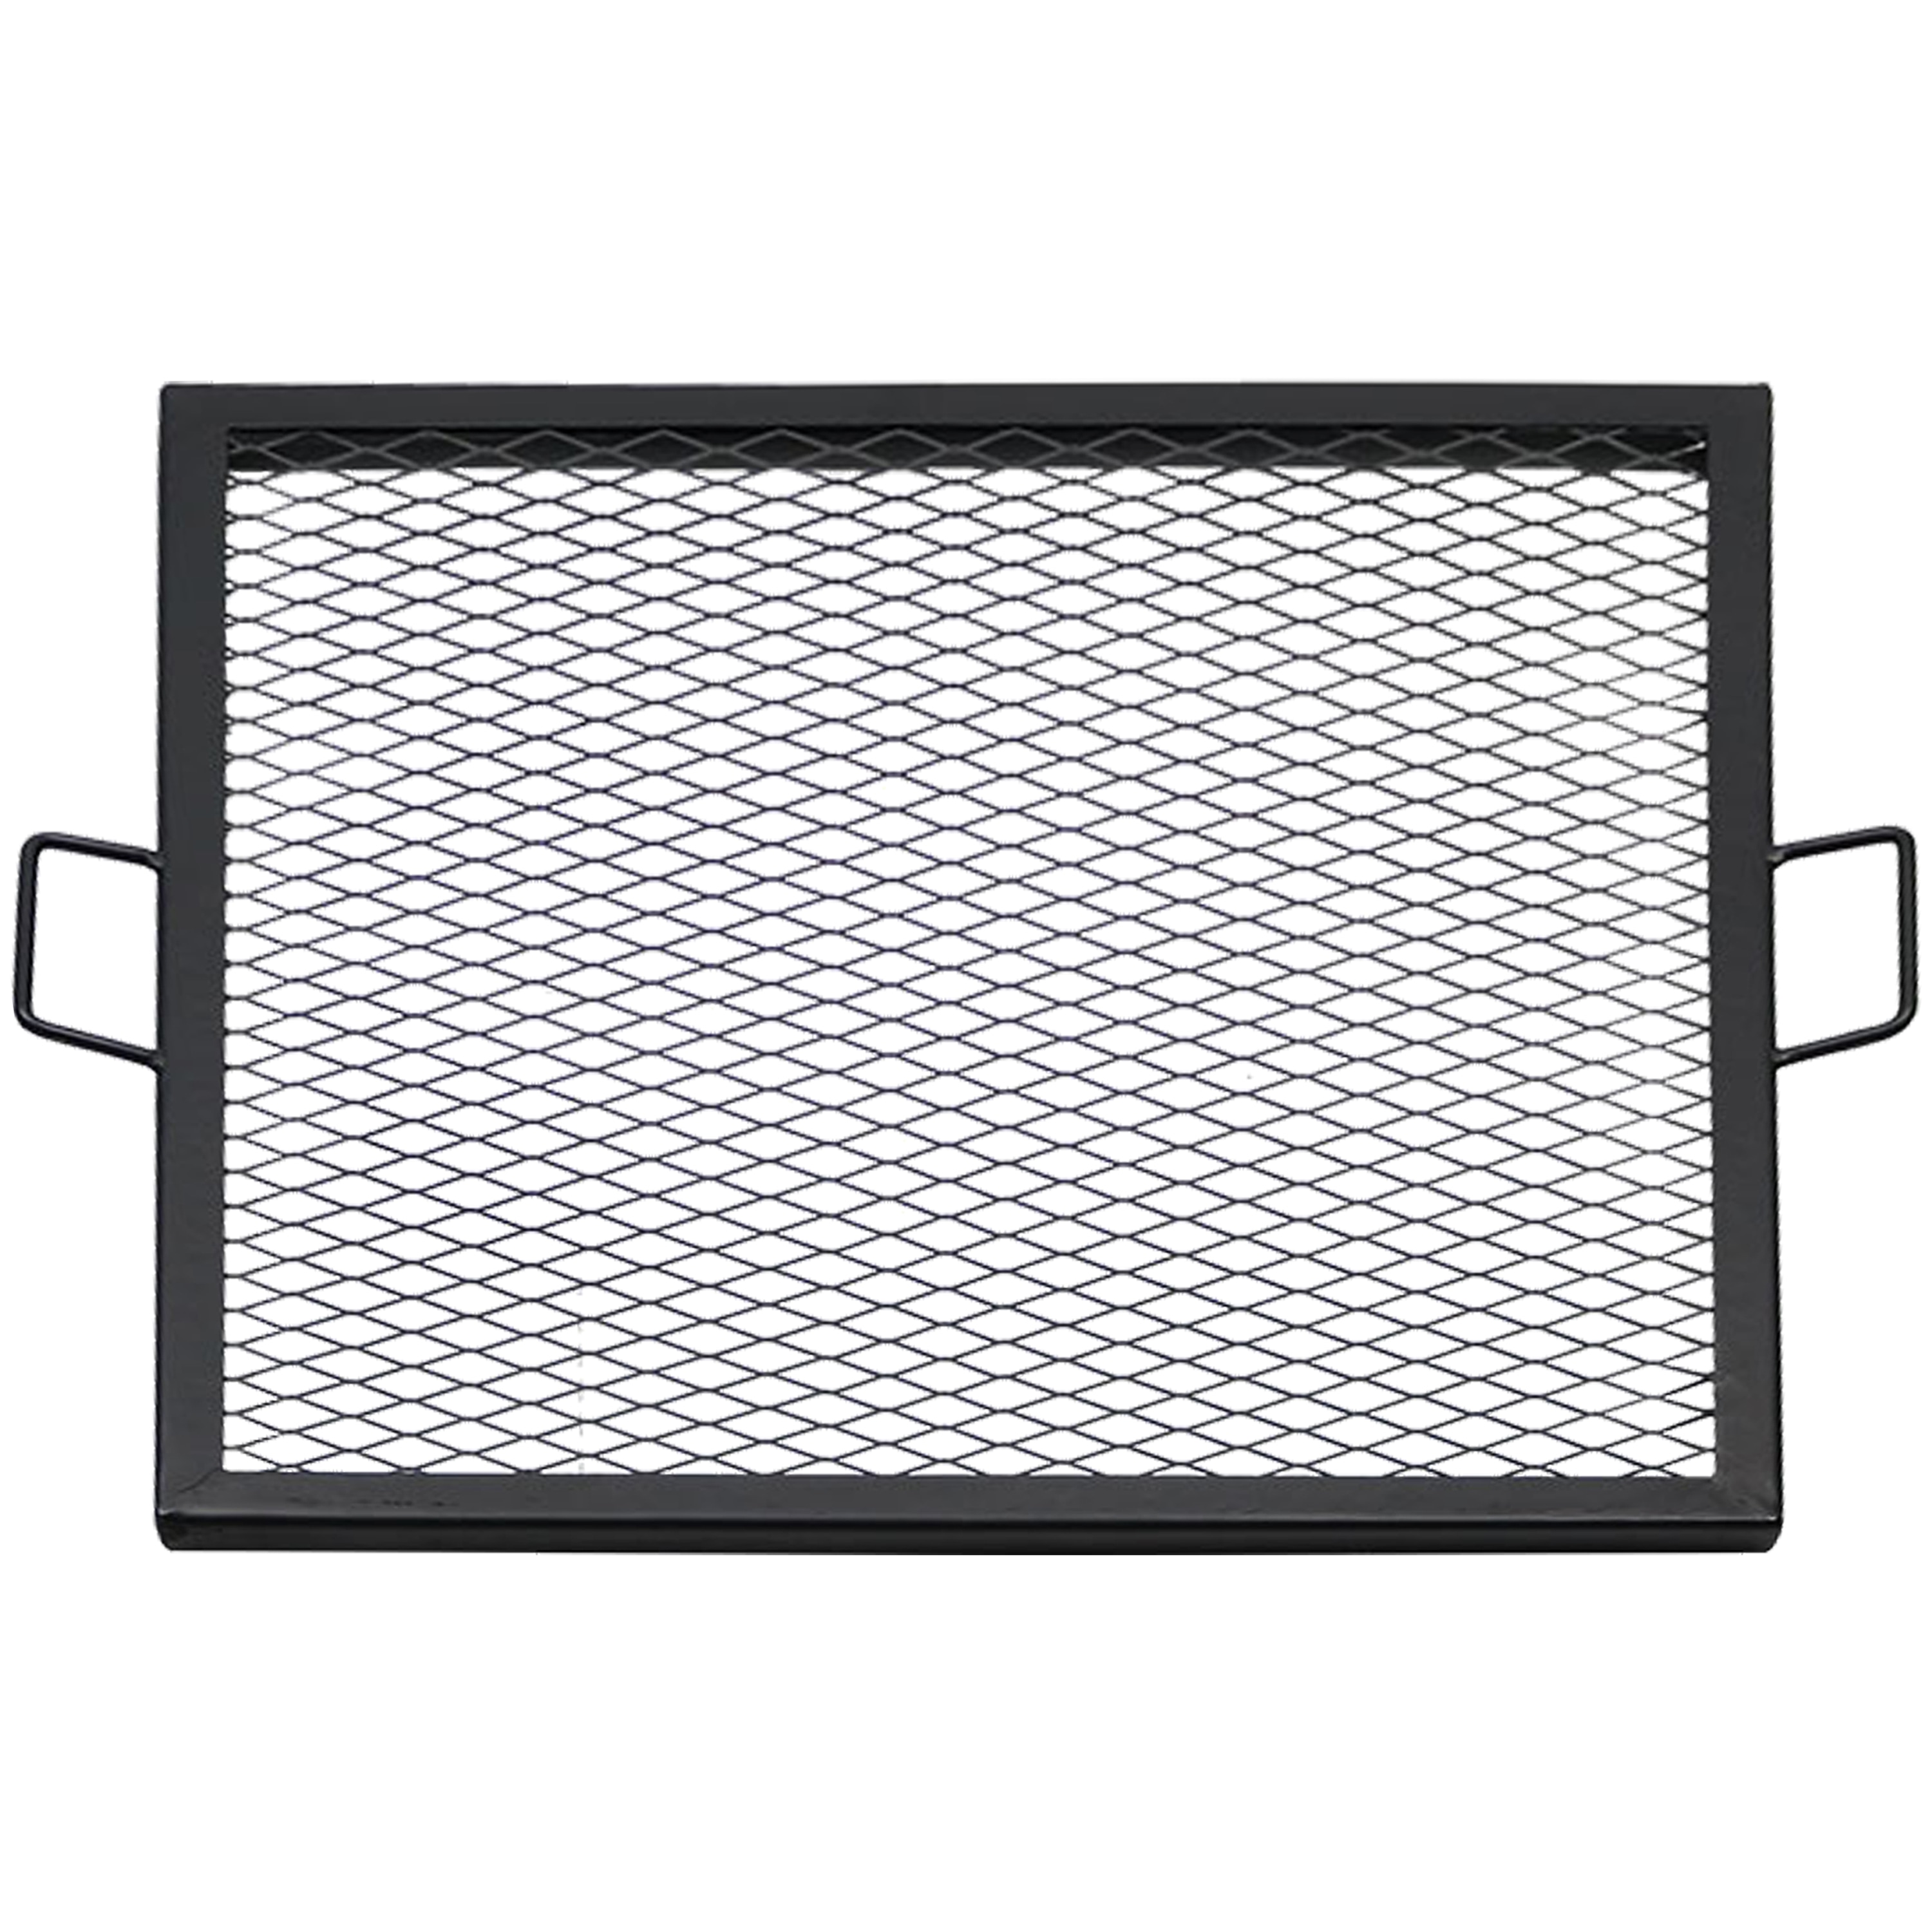 Sunnydaze Decor 24-in x 24-in Rectangle Plated Steel Cooking Grate ...